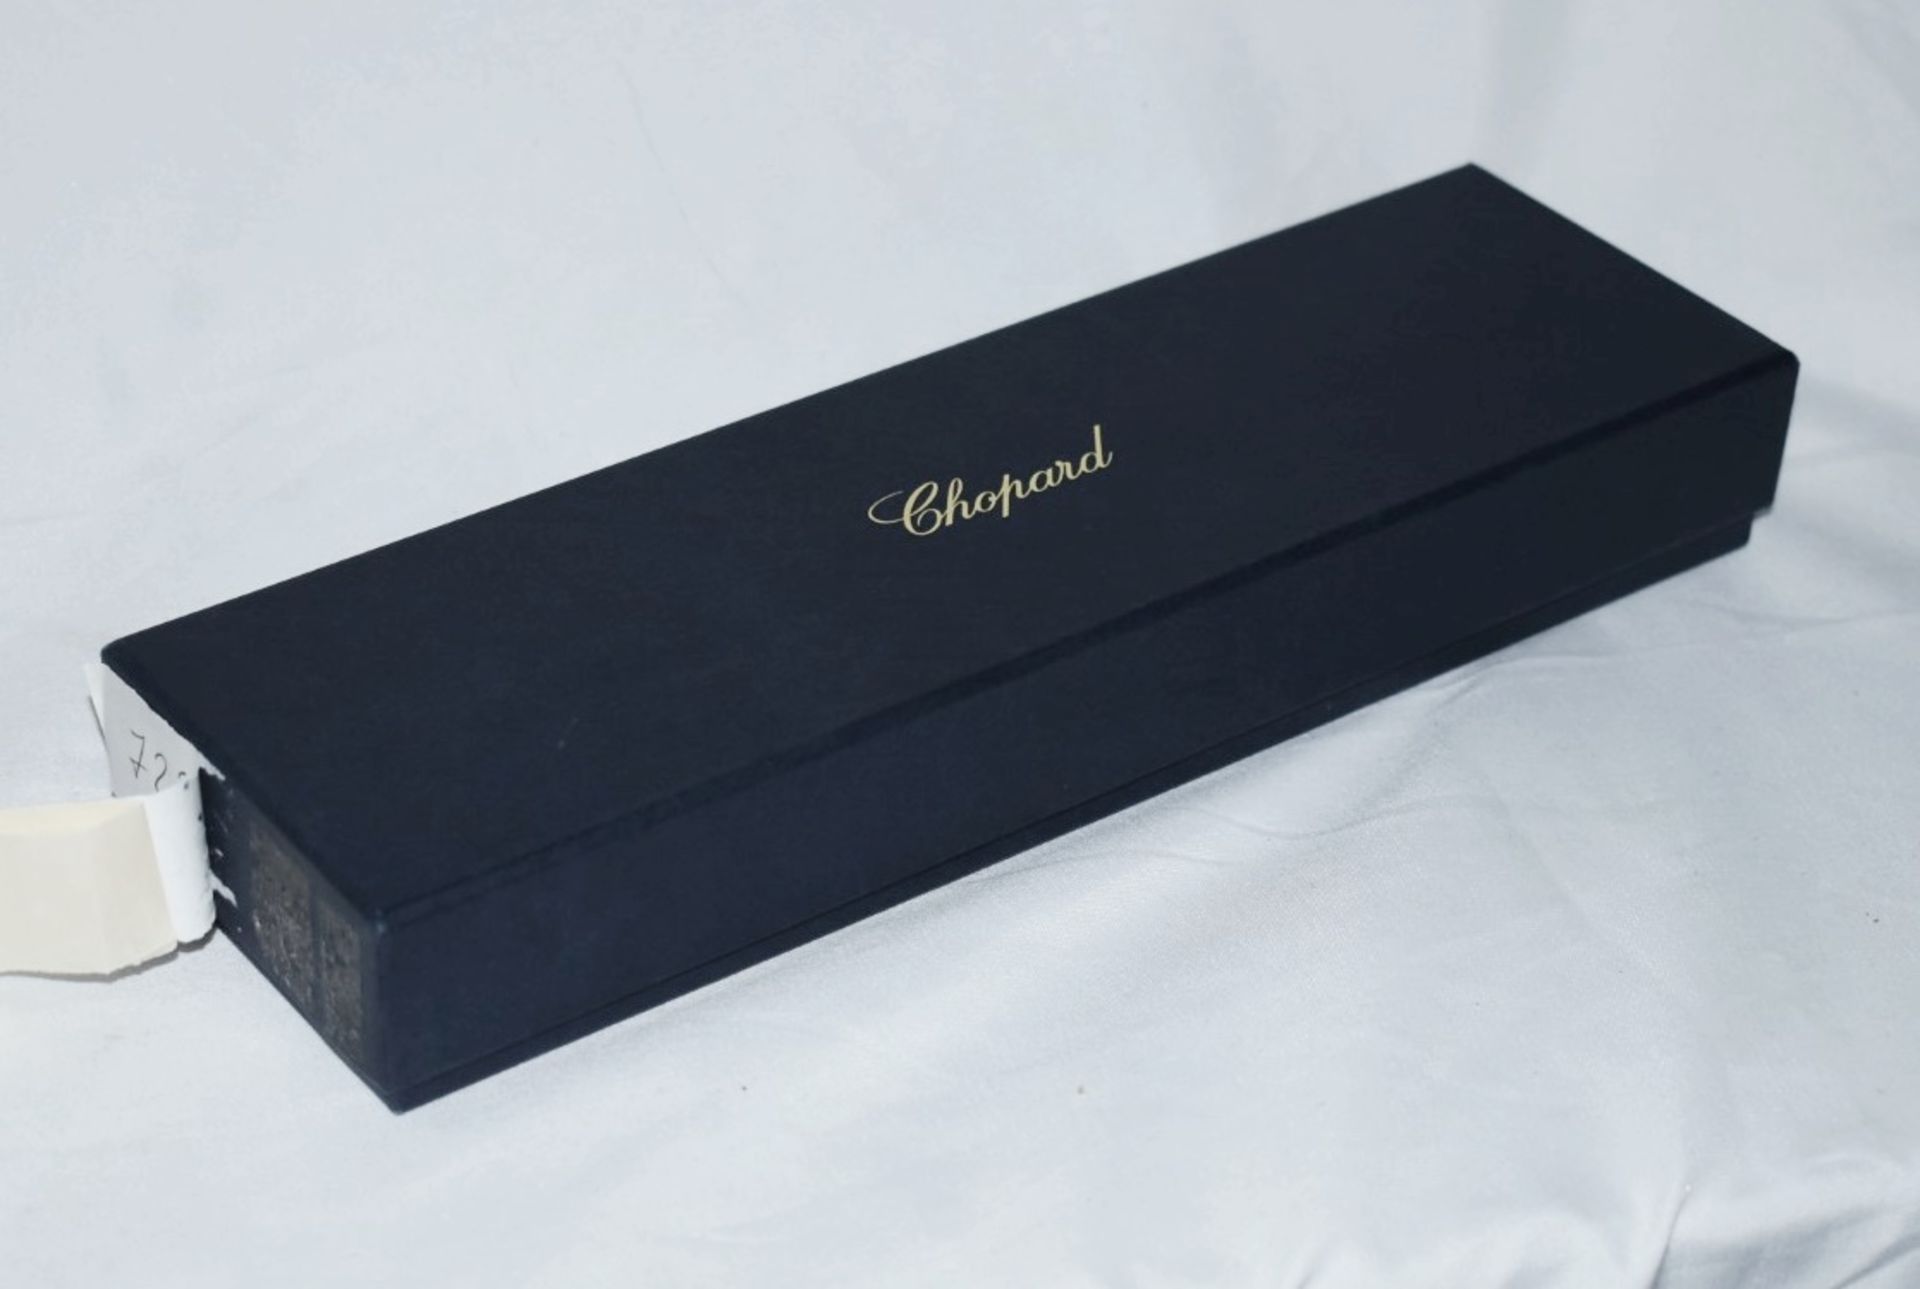 1 x CHOPARD 'Classic' Luxury Ballpoint Pen With Presentation Case, Navy Blue - Boxed Stock - - Image 7 of 11